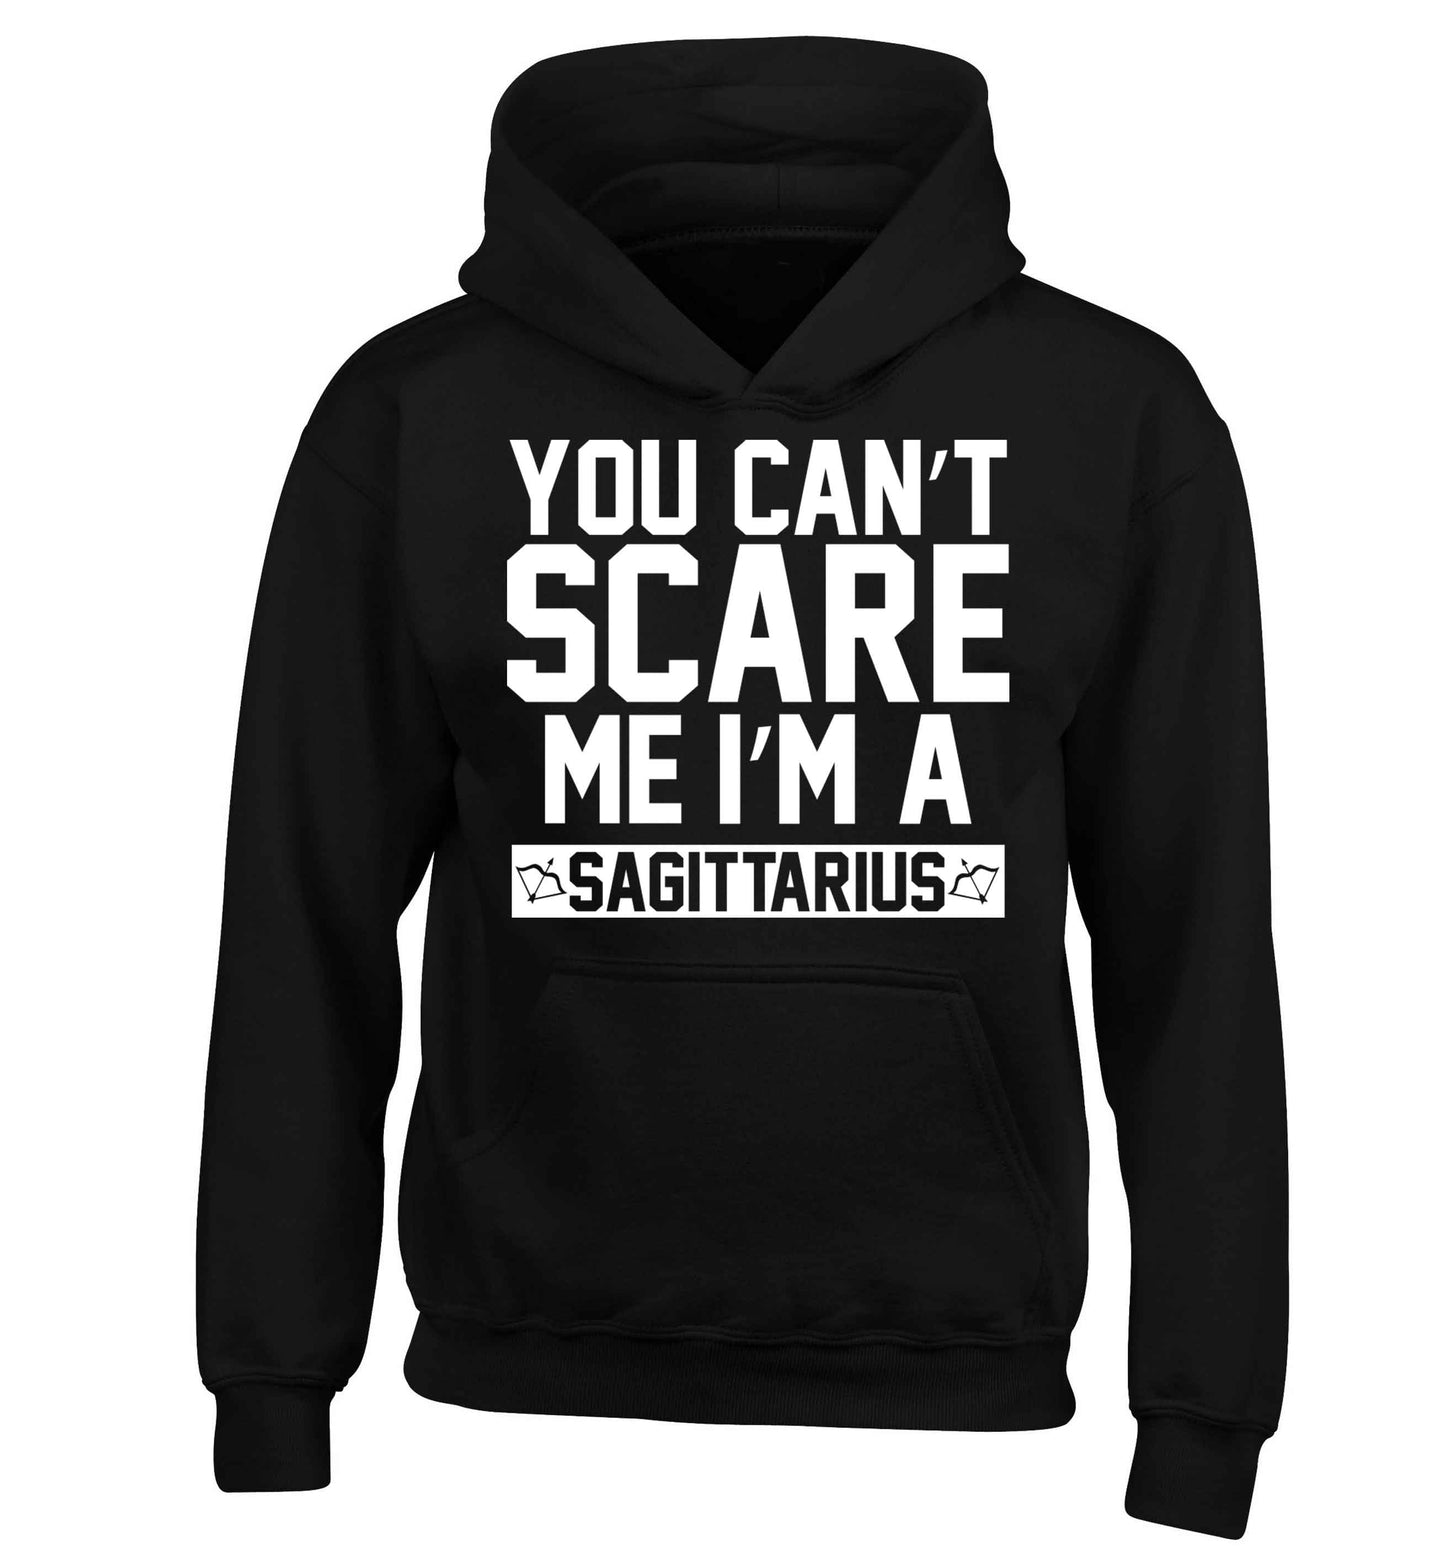 You can't scare me I'm a sagittarius children's black hoodie 12-13 Years